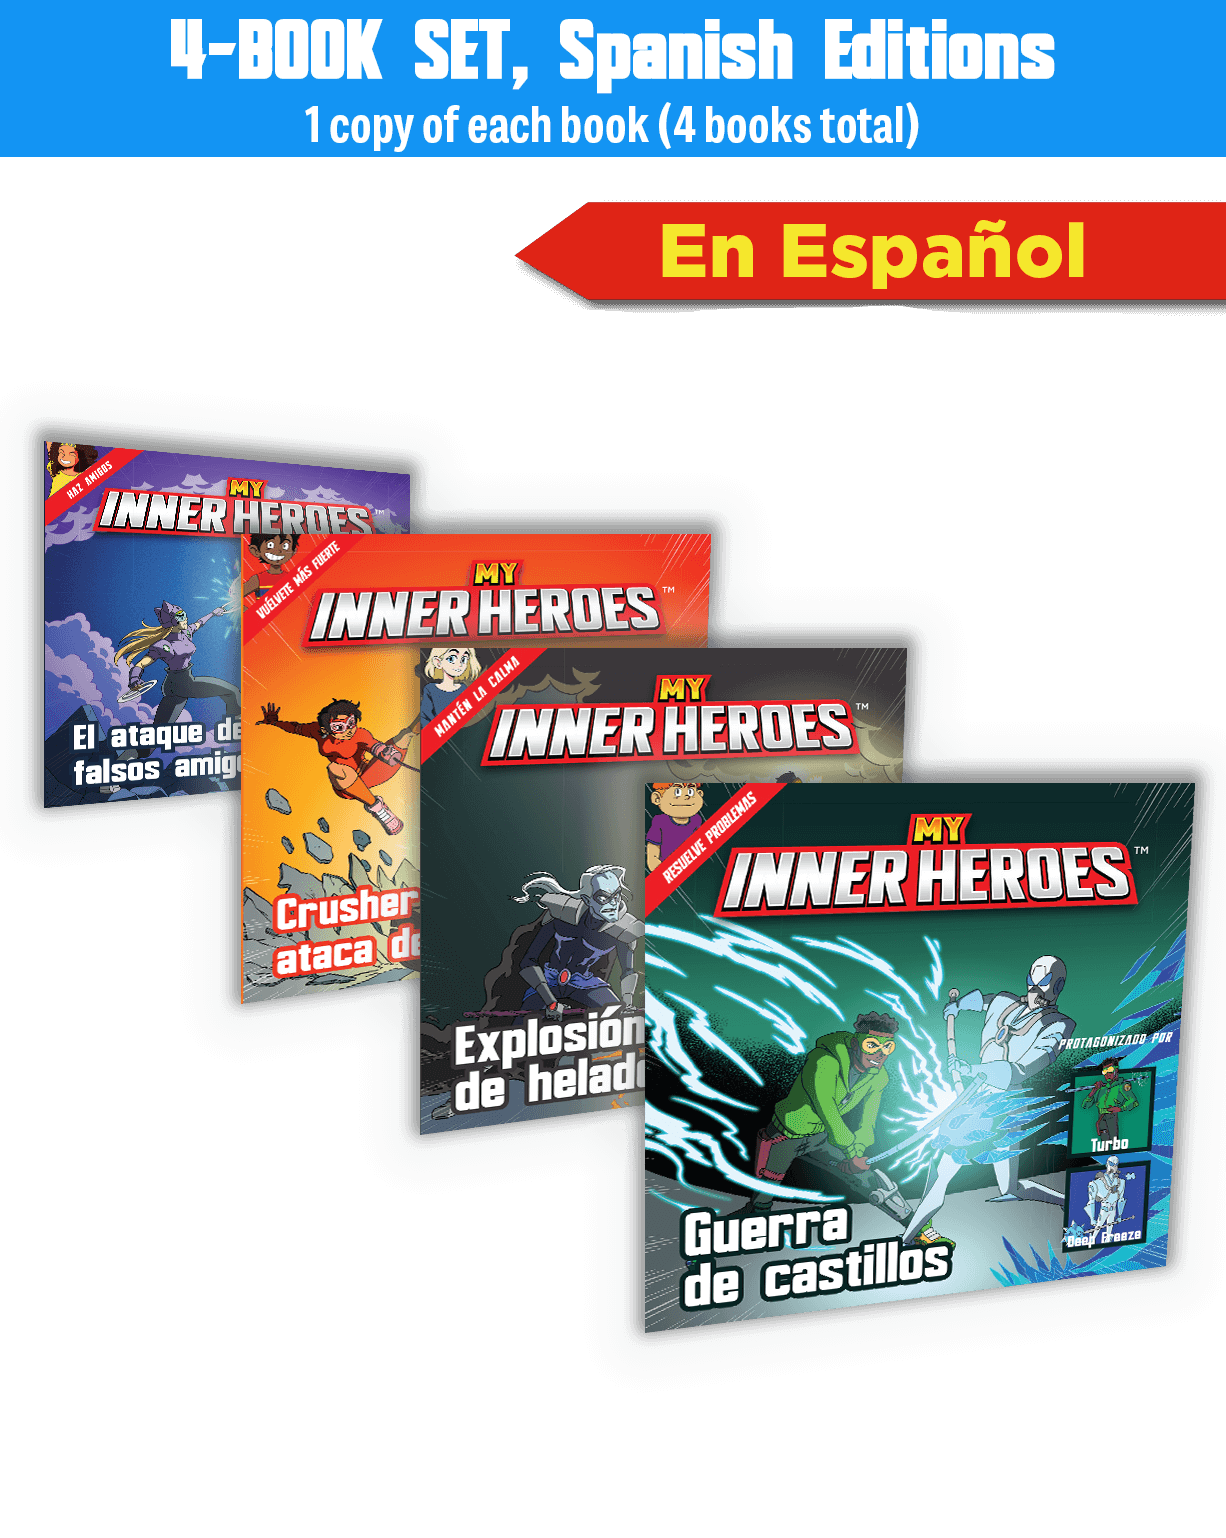 My Inner Heroes 4-Book Set, Spanish Editions